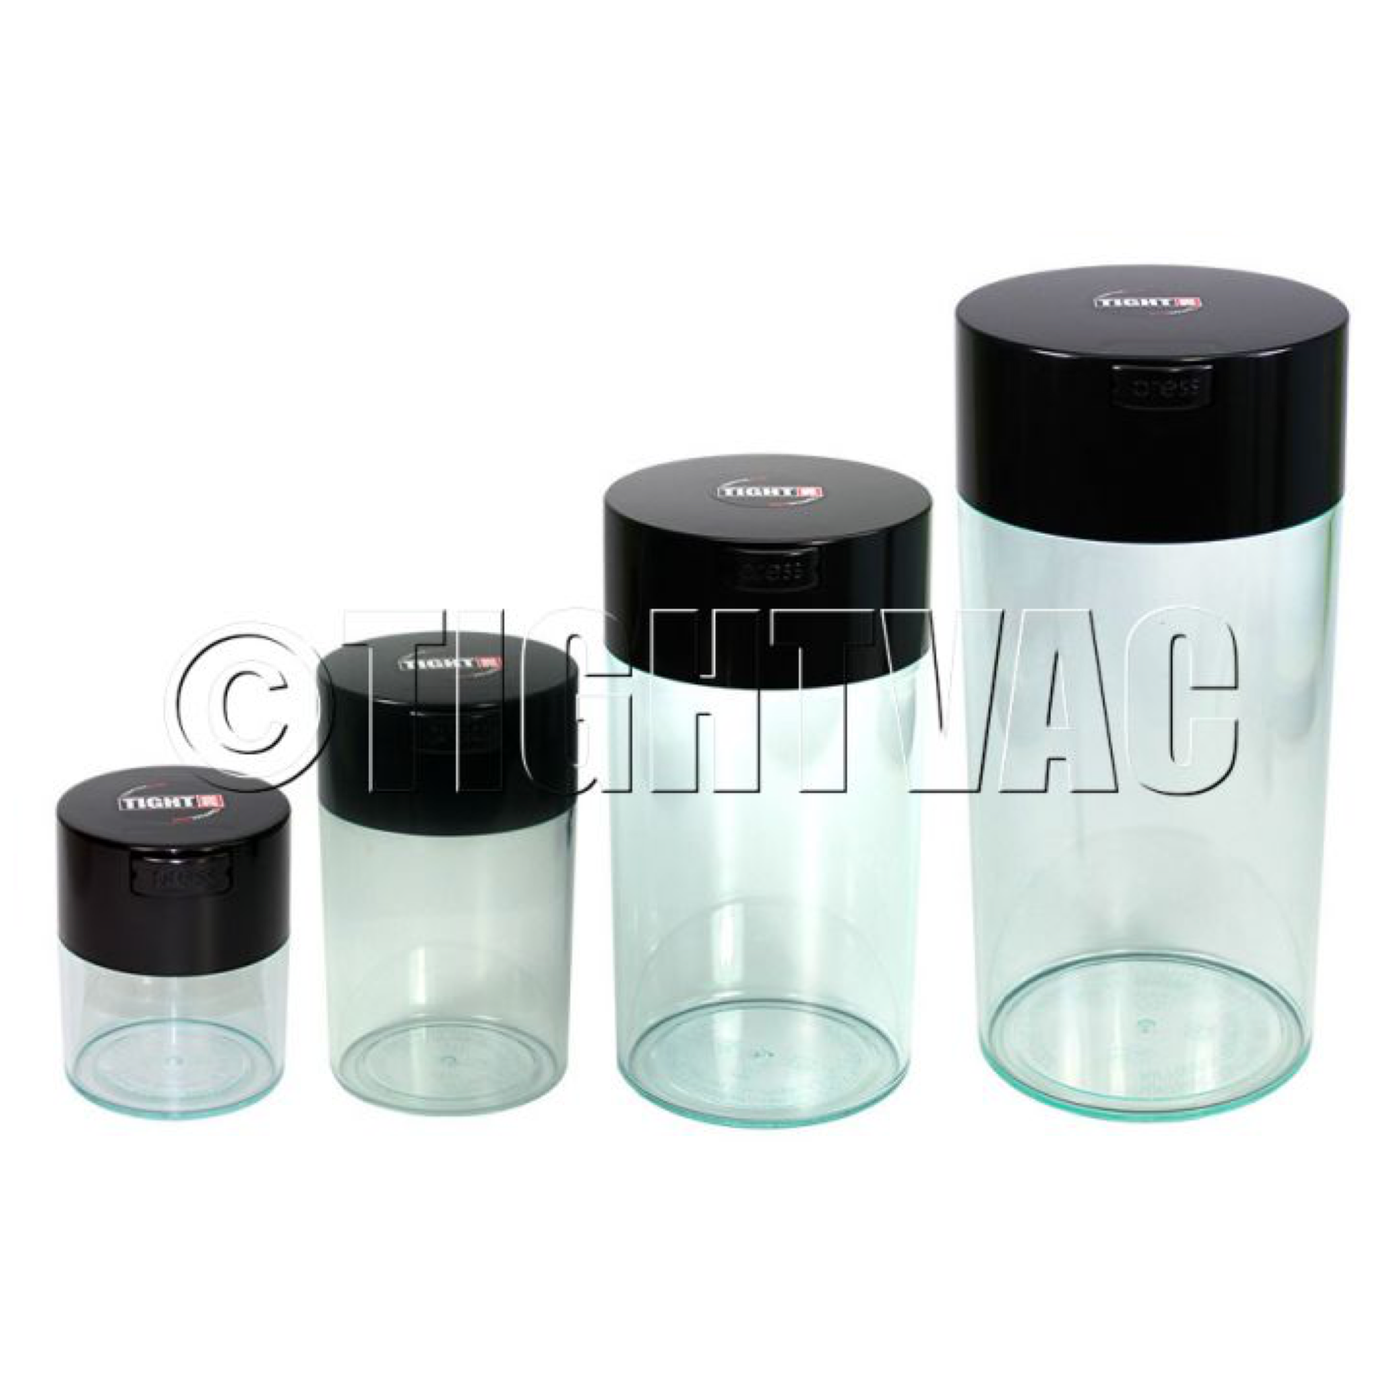 Vacuum Seal Canisters 1.4 Liter